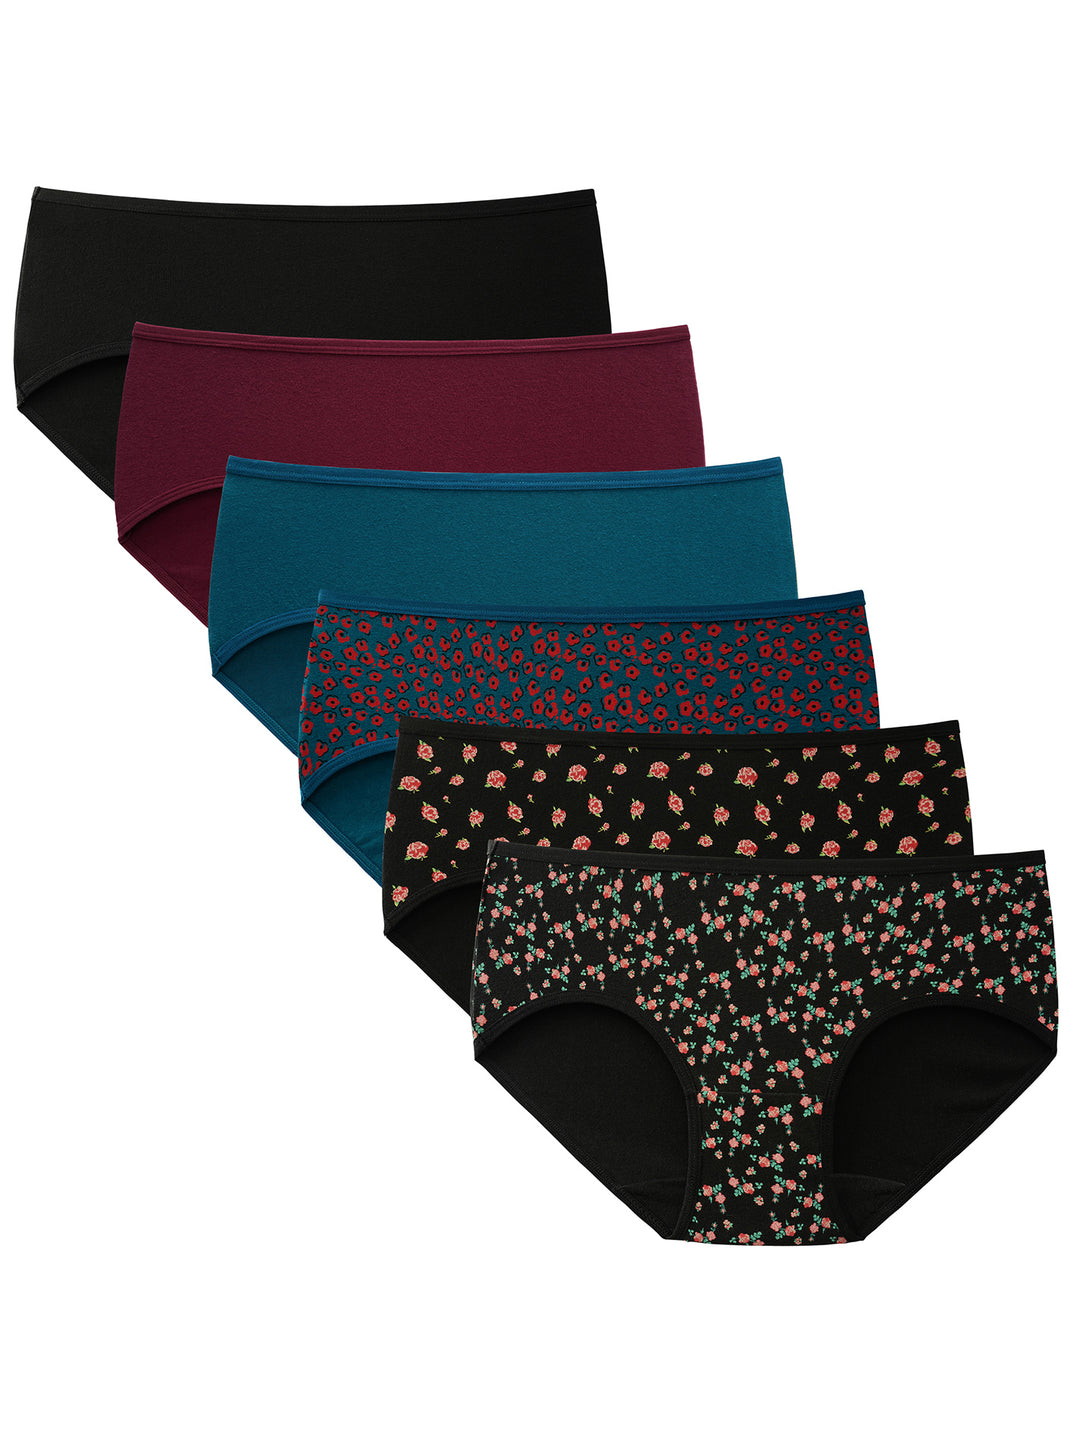 INNERSY Underwear for Women Cotton Hipster Panties Wide Waistband Pack of 6  (Small, Athletic) 